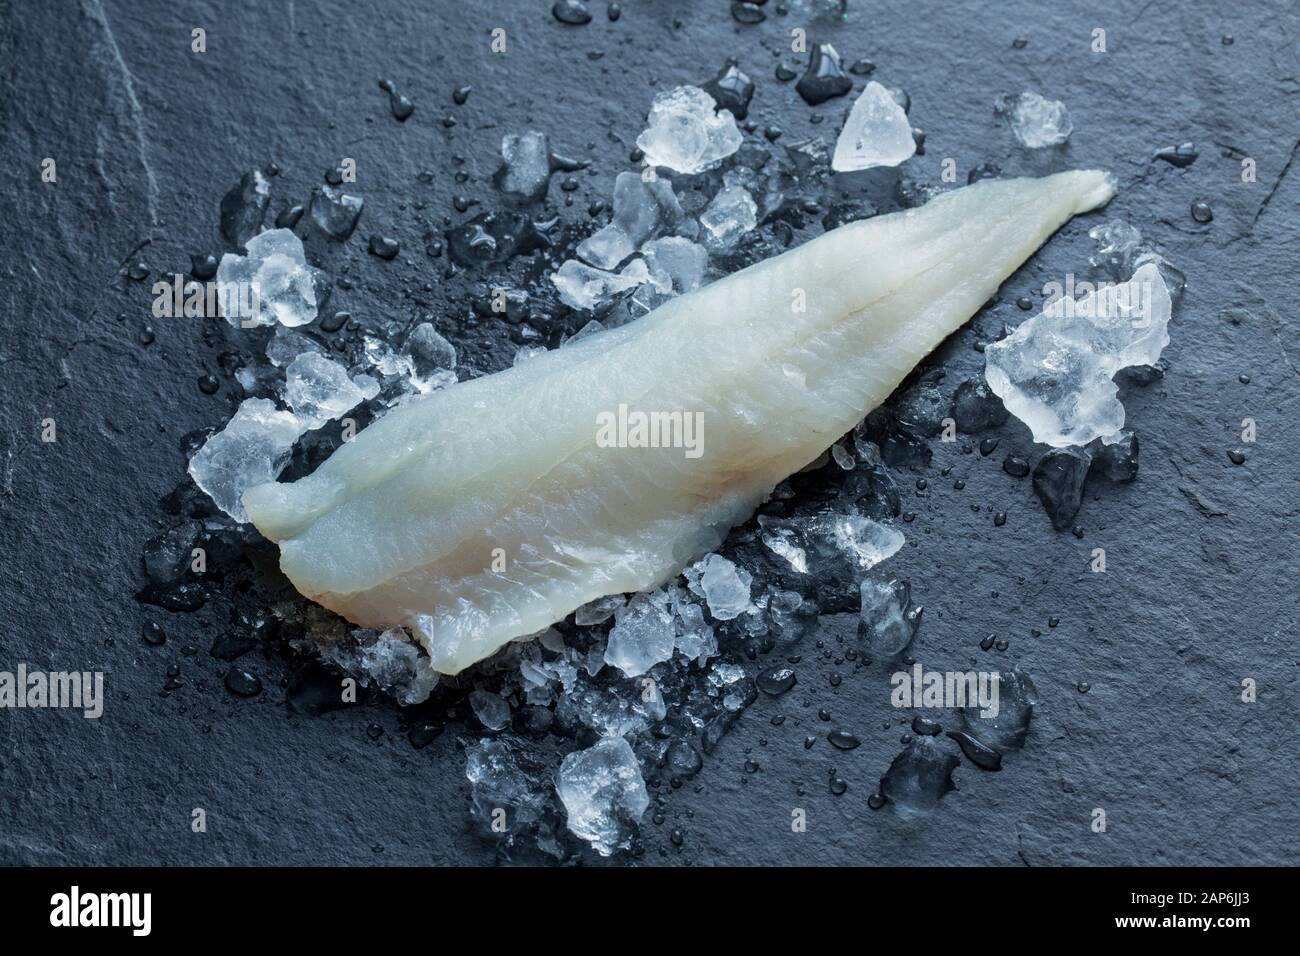 A single raw whiting fillet, Merlangius merlangus, from a whiting caught in the English Channel on rod and line from a boat. Ice and dark slate backgr Stock Photo